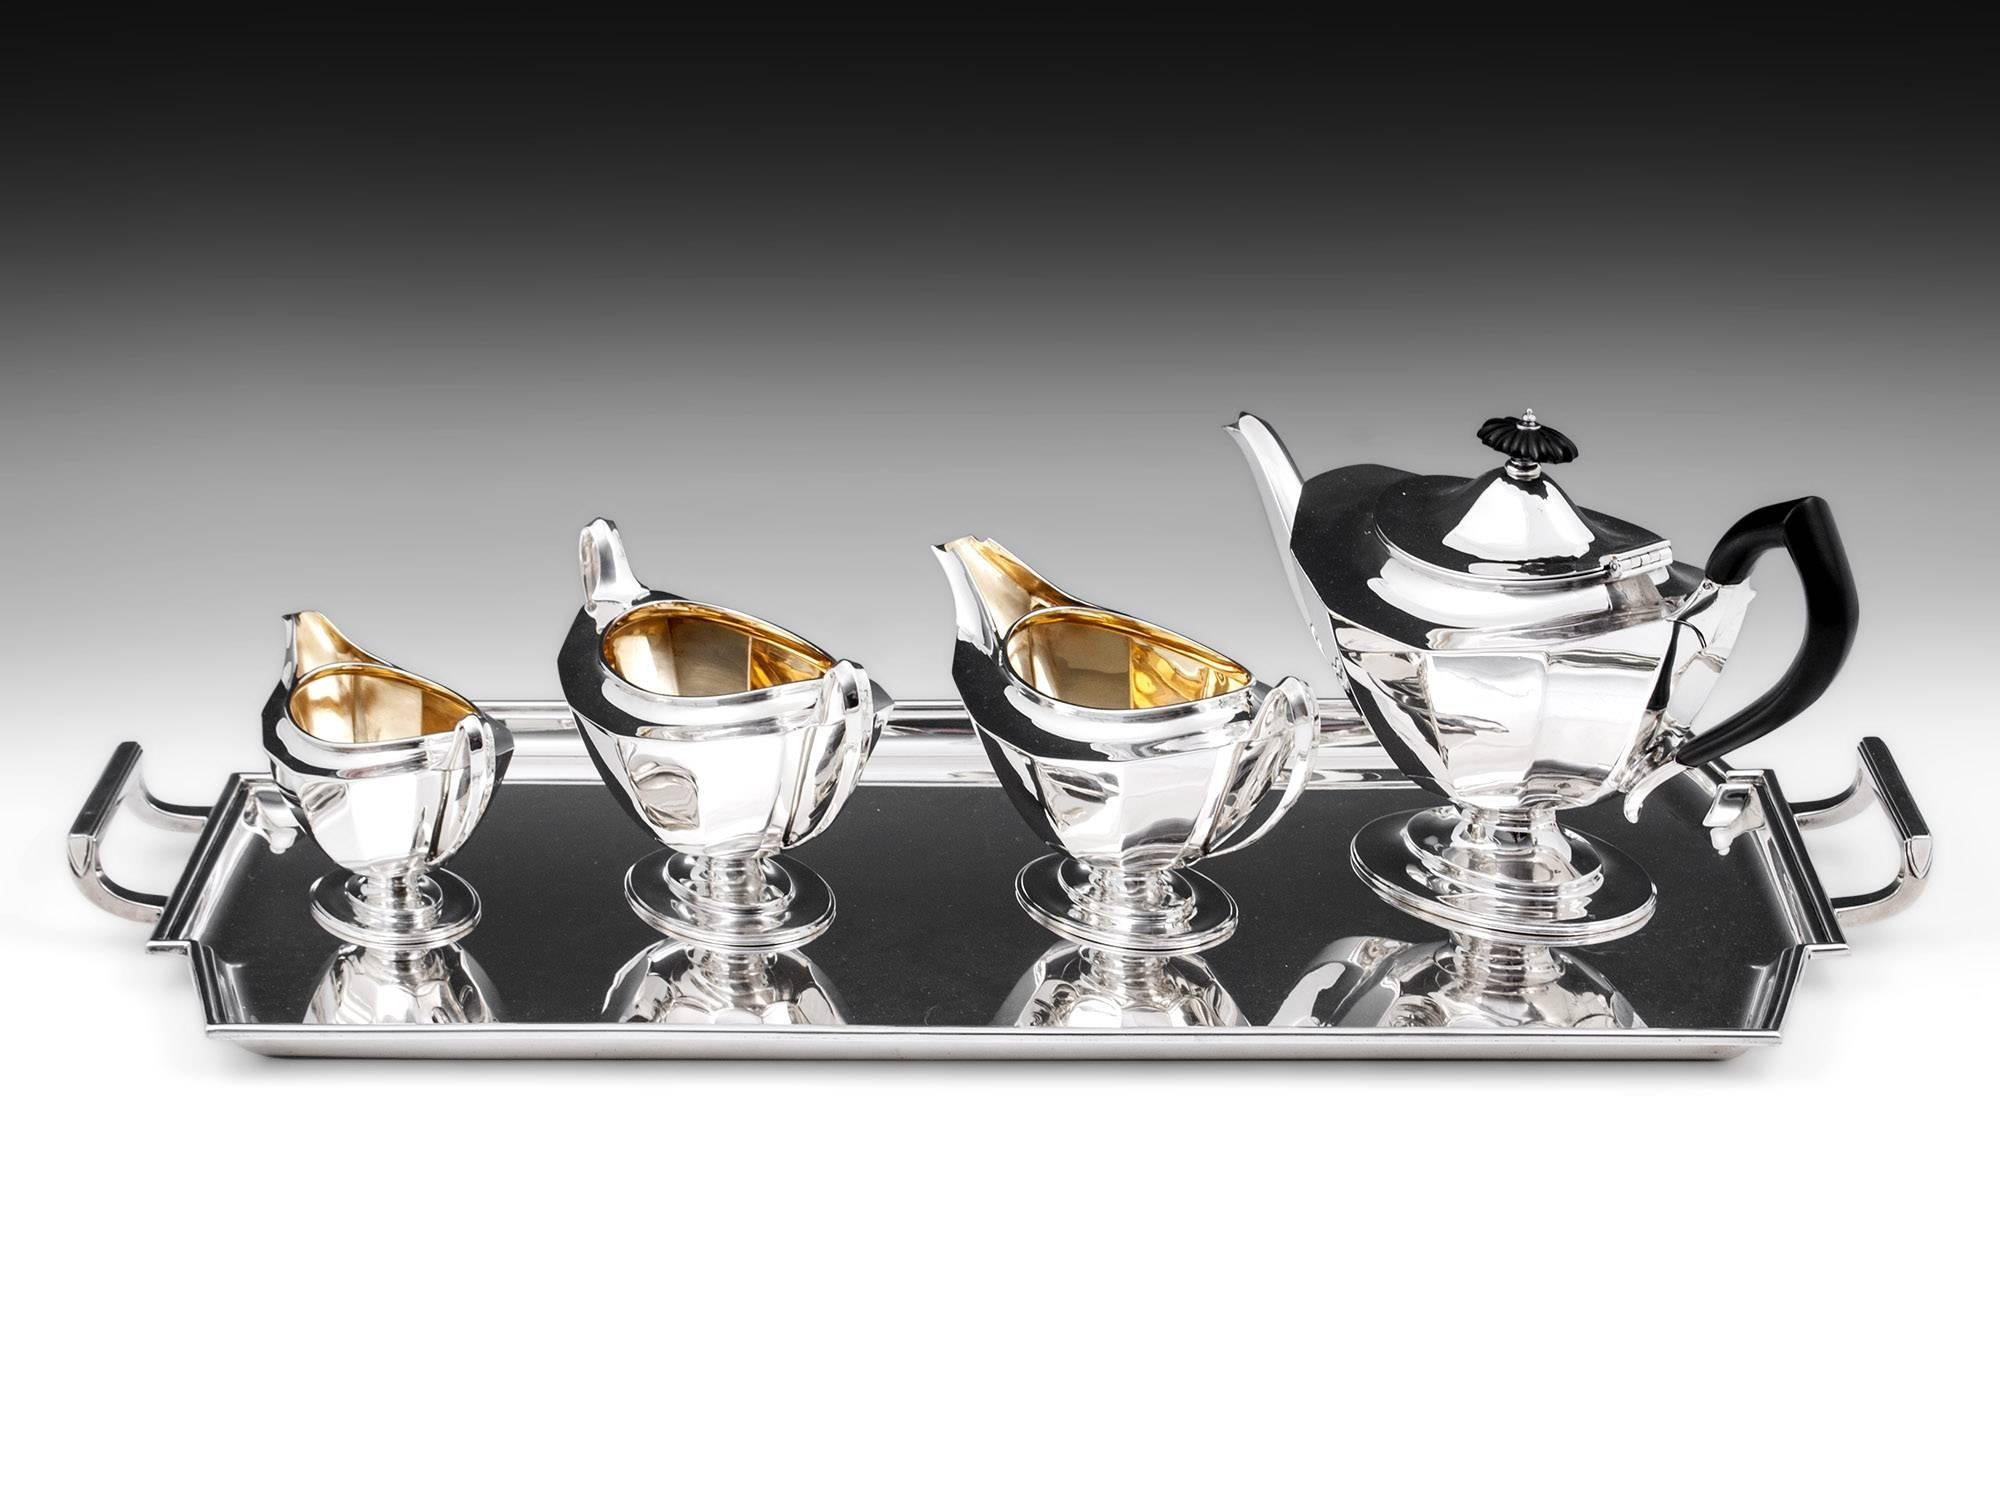 Art Deco sterling silver tea set of outstanding quality with Ebony handles, comprises of Tea pot, Water jug, Milk jug & Sugar bowl, all four pieces are superbly made and by Sheffield Silversmiths Harrison Brothers & Howson. Each piece is so typical